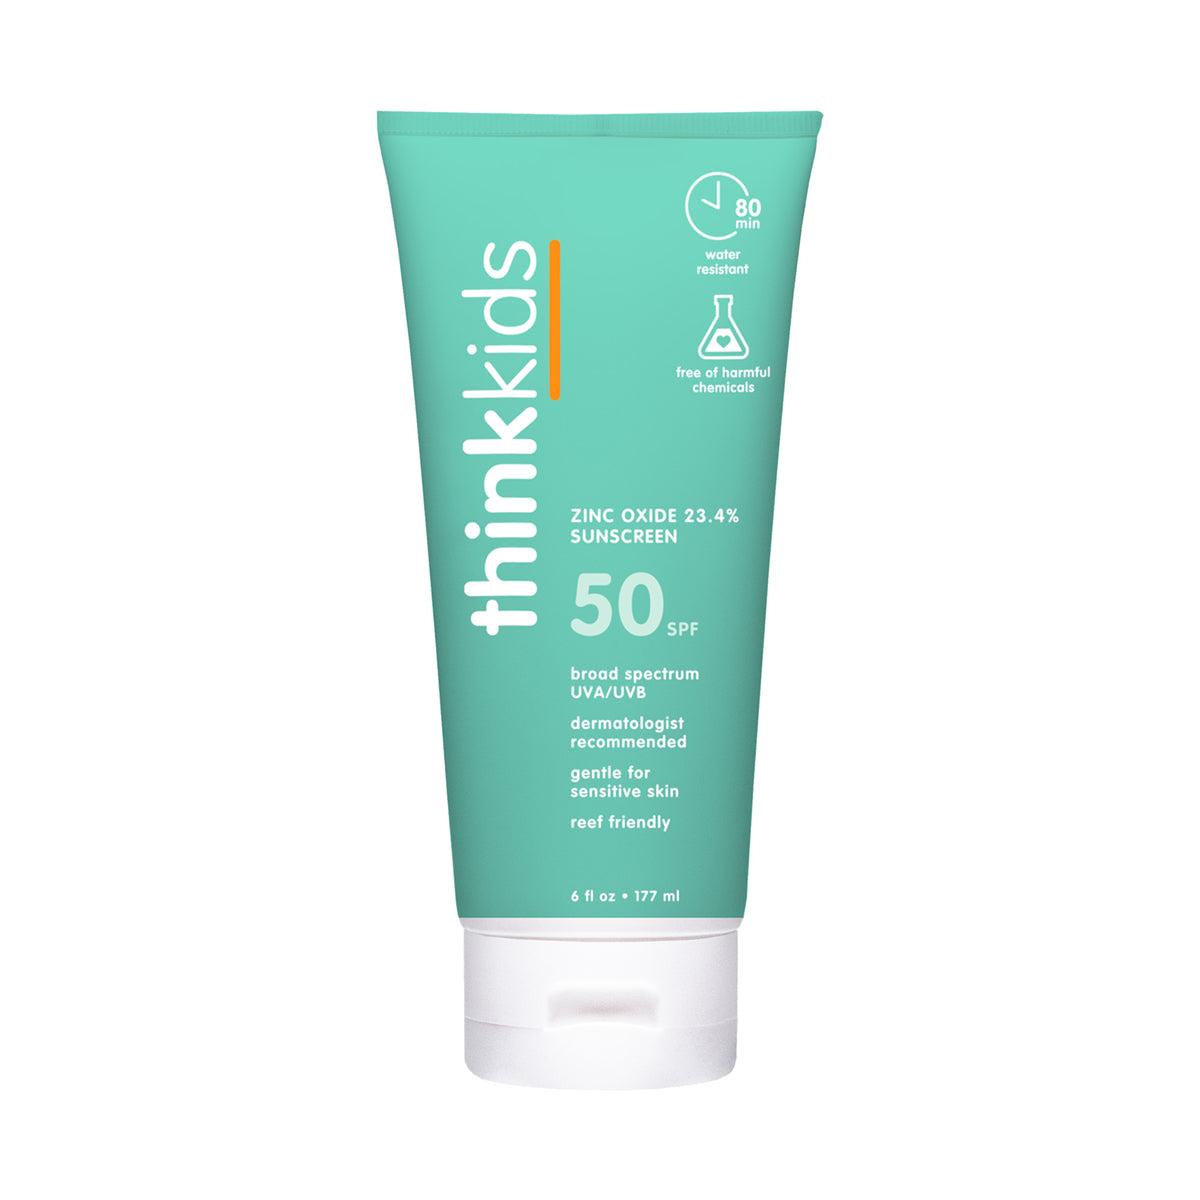 A tube of Thinkkids SPF 50 sunscreen, emphasizing its features such as broad spectrum UVA/UVB, dermatologist recommended, and reef friendly.